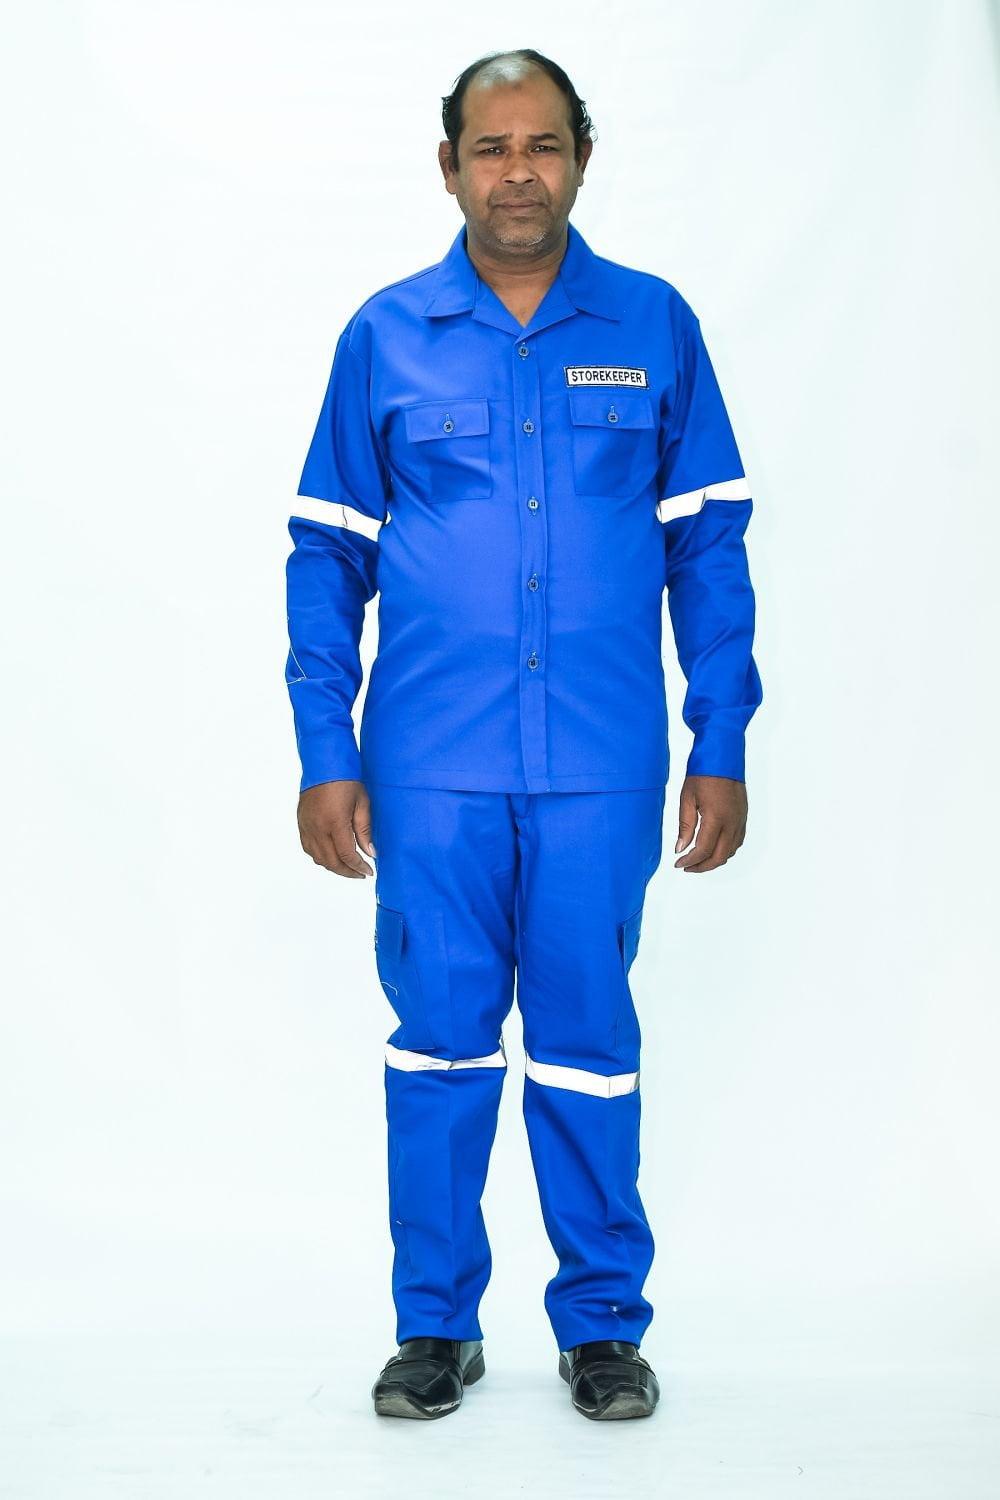 Product Best Construction Worker Uniform Magnification & Suppliers Company image